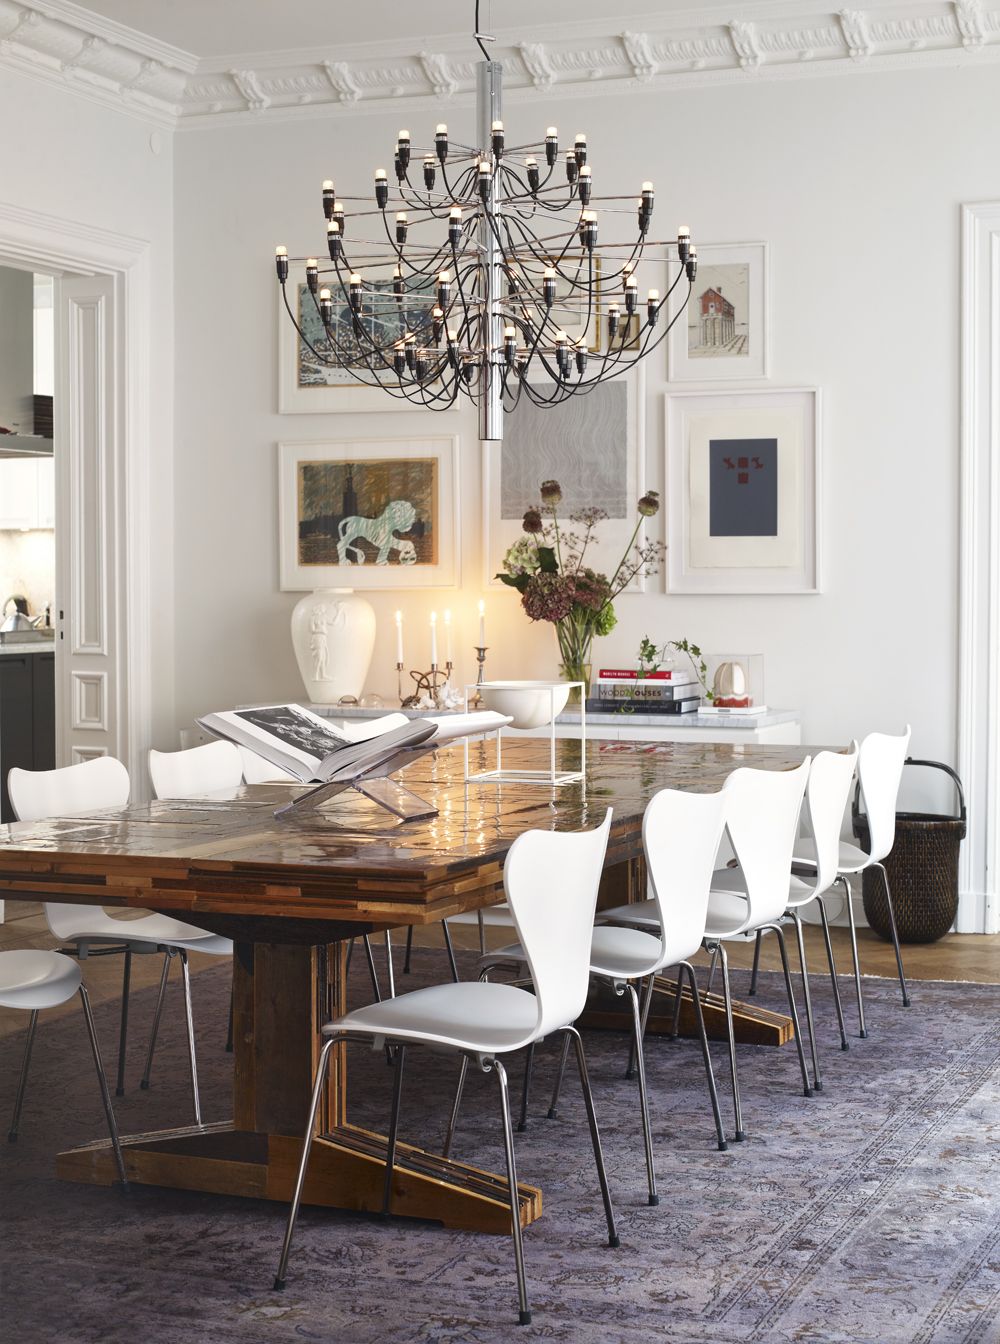 You should care; they are your
dining  chairs!